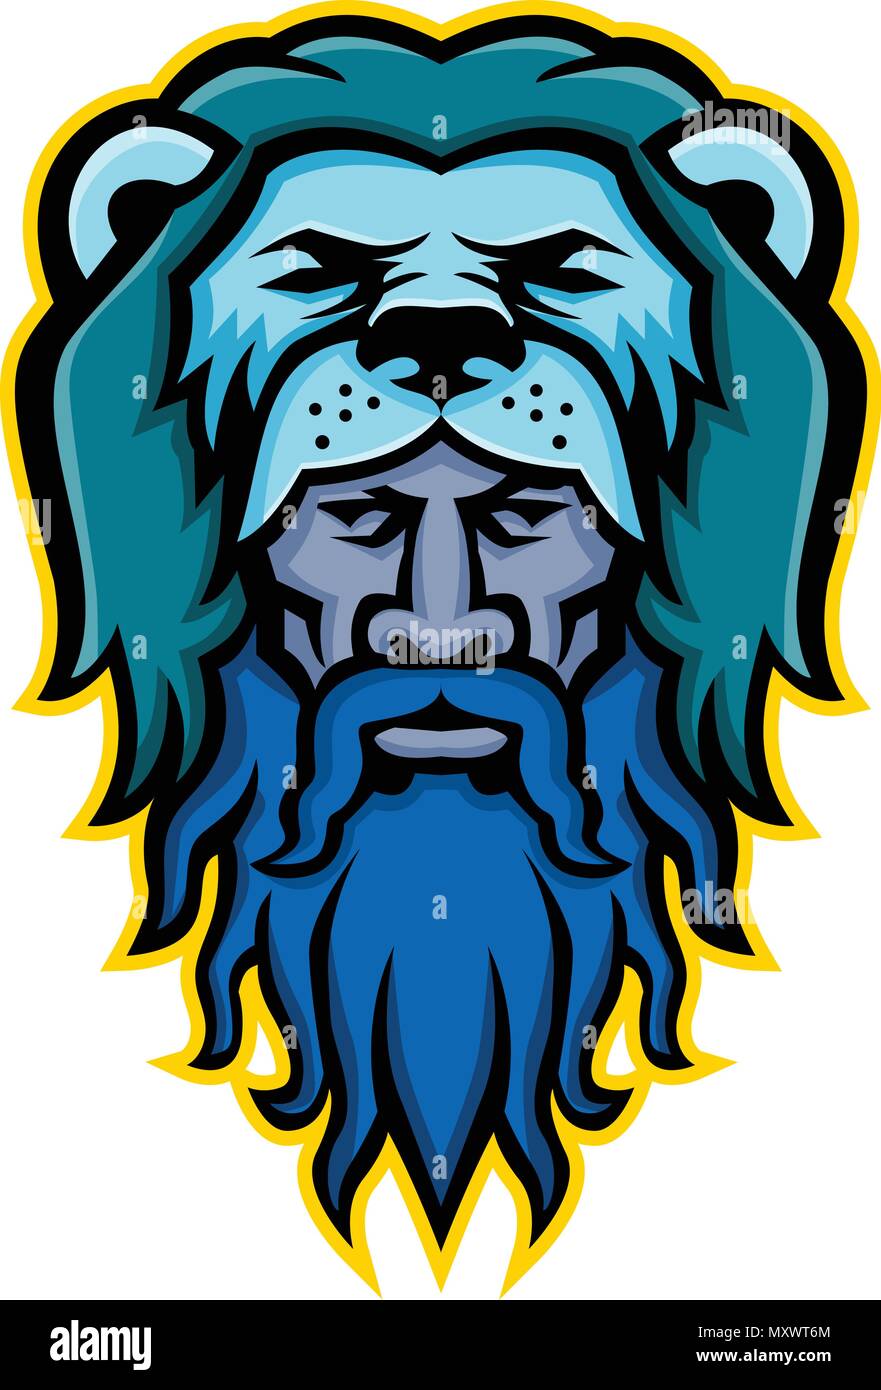 Mascot icon illustration of head of Hercules or Heracles, a Roman hero and mythology god, son of Jupiter wearing a lion skin pelt viewed from front on Stock Vector